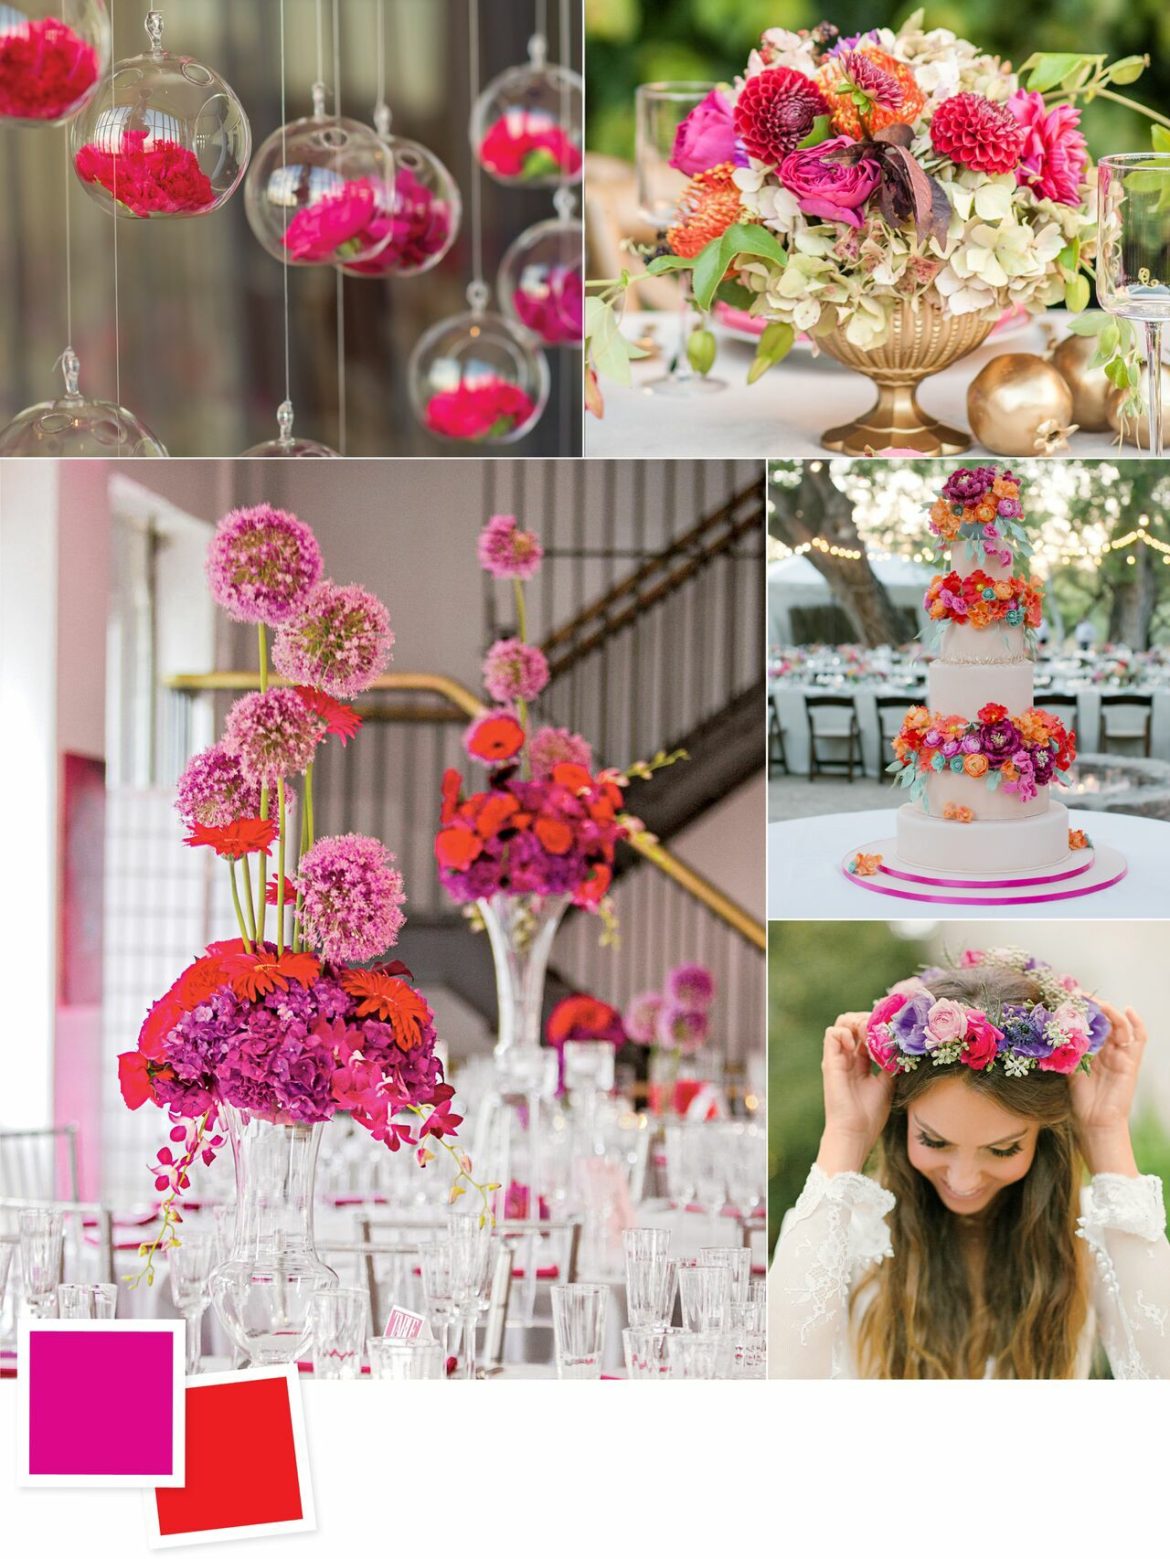 Evergreen Wedding Colour Combos For Your Wedding Decoration | Fuchsia and Poppy Wedding Colors